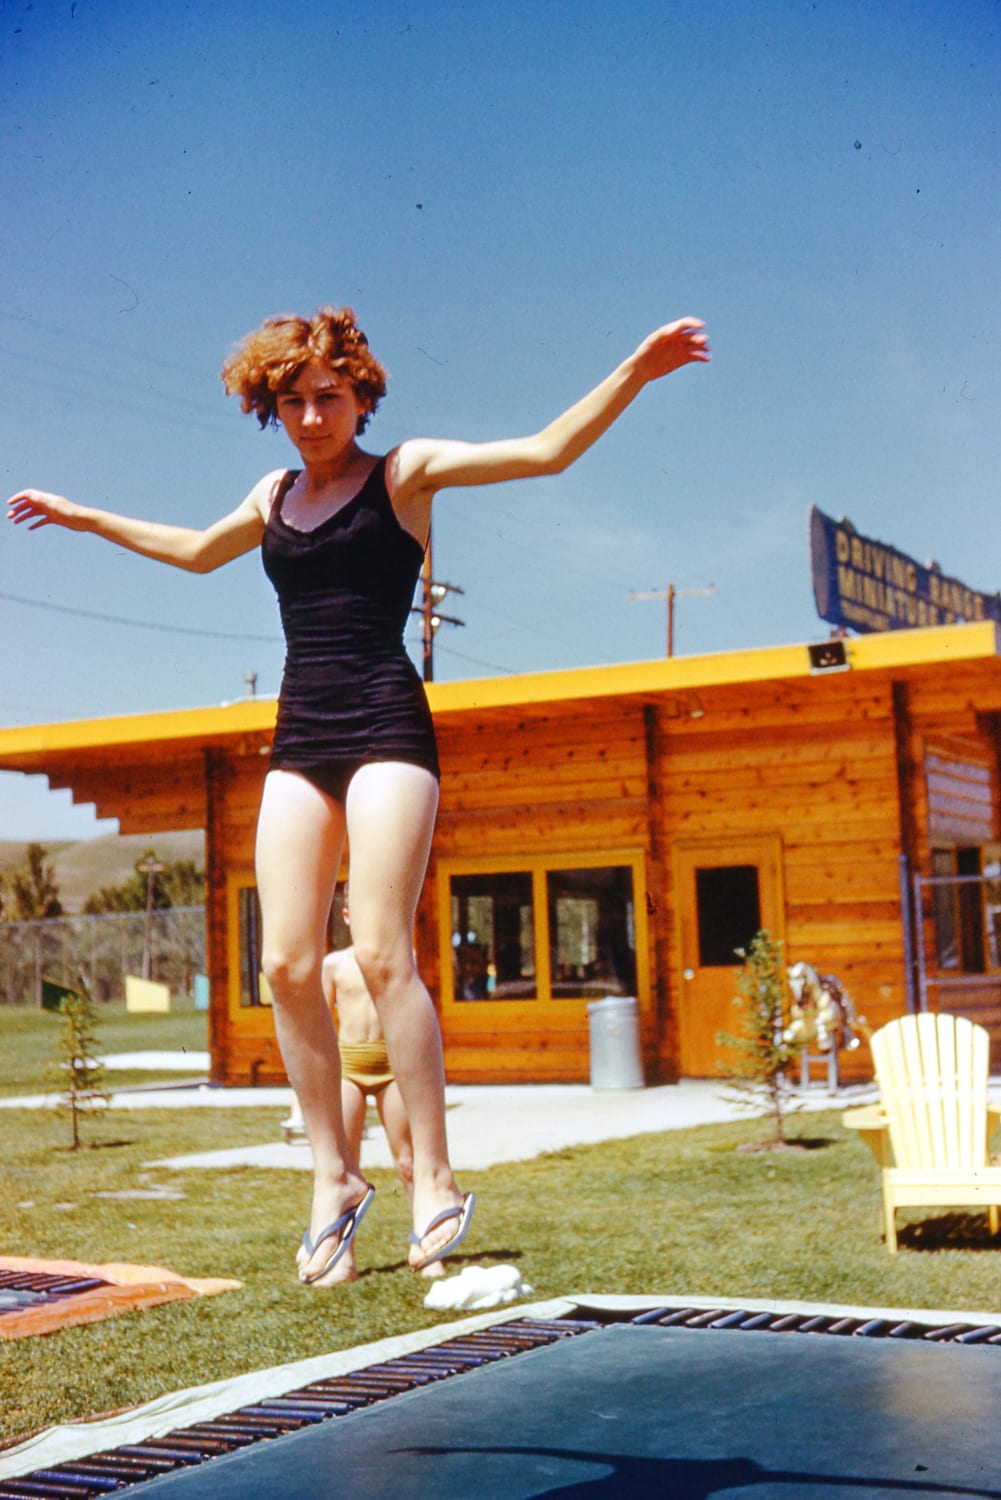 July 1963. First encounter ever with a trampoline. At a “ fun park “